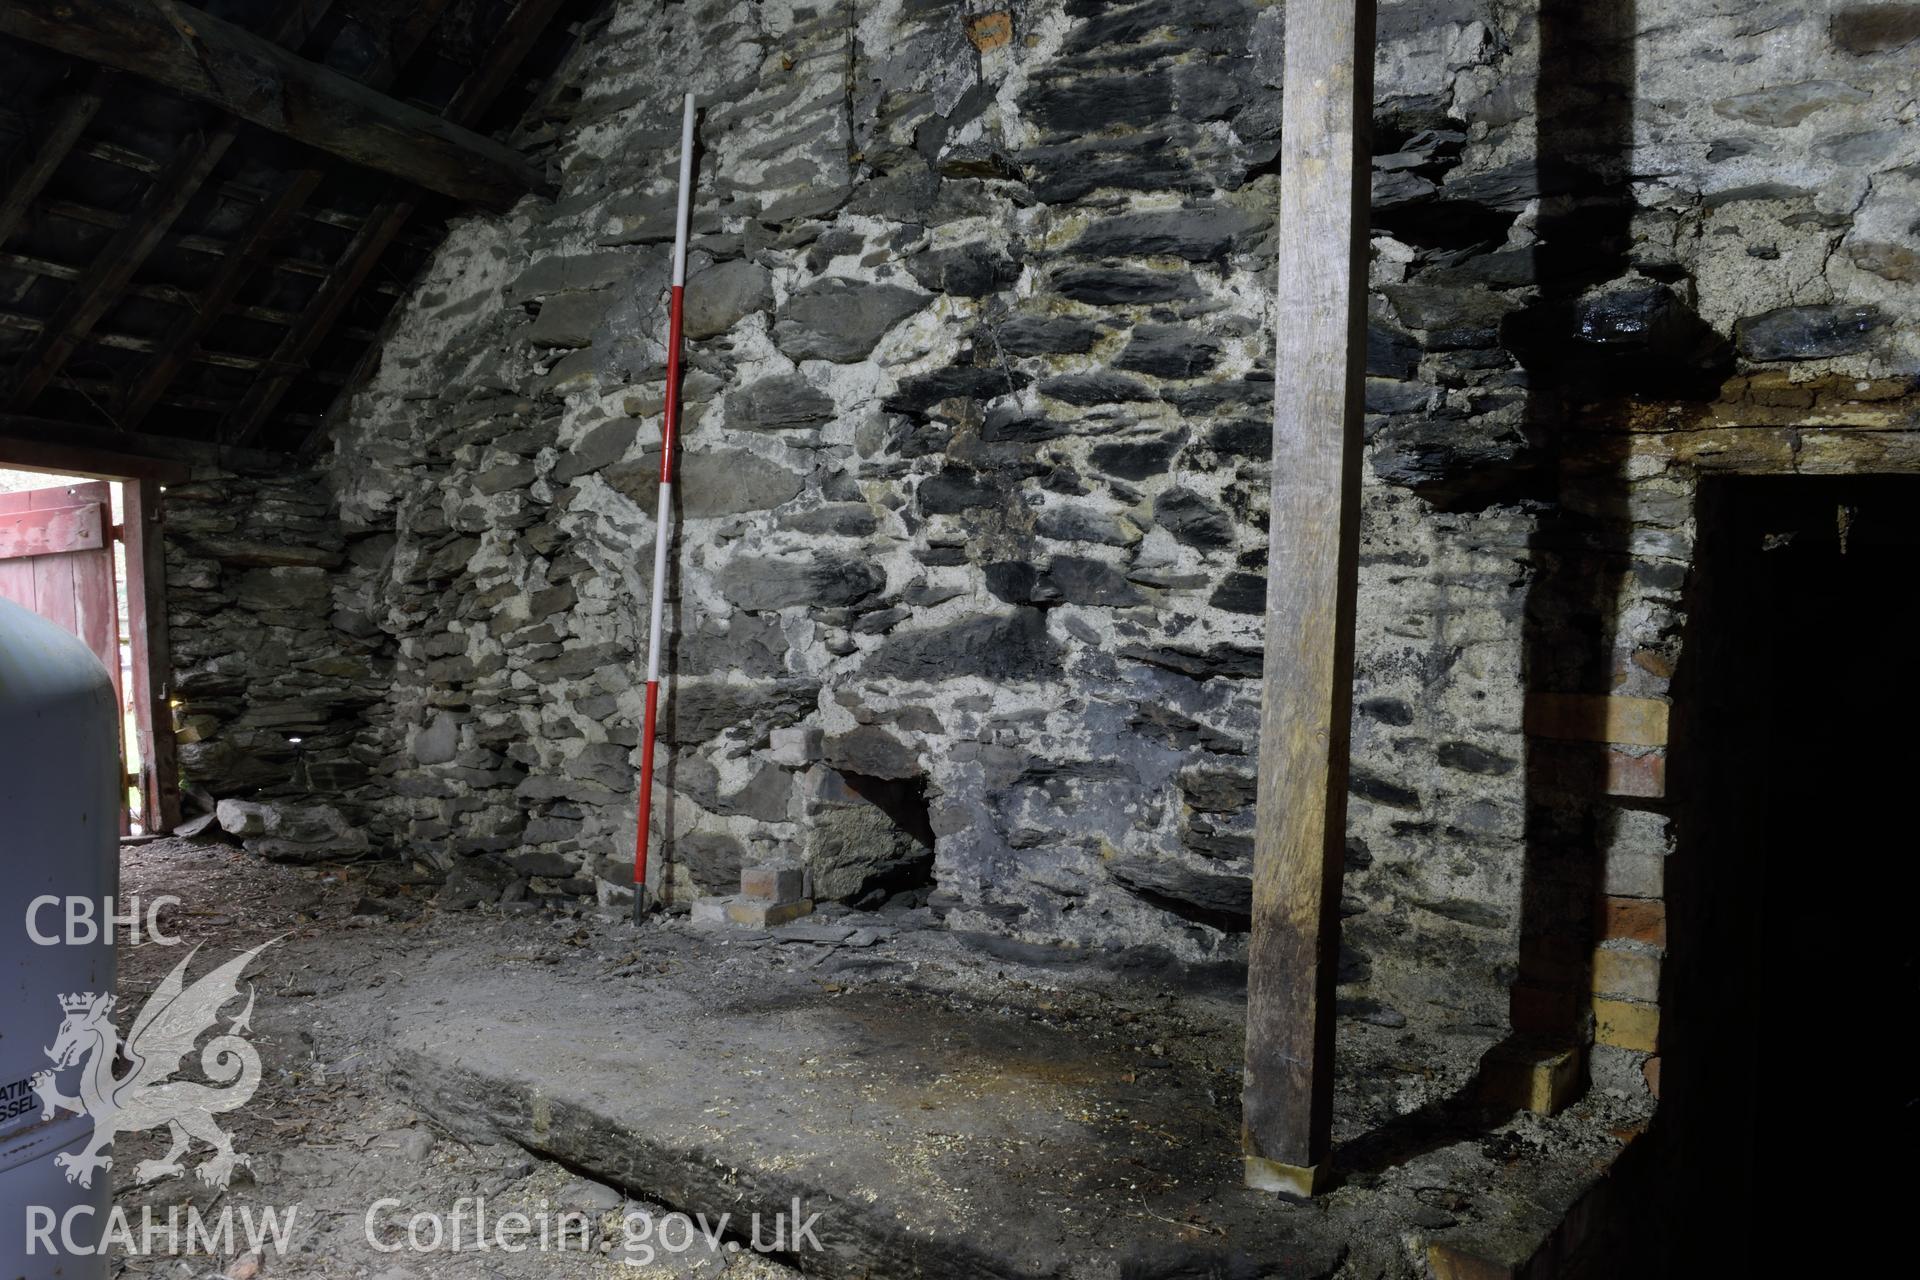 Photograph showing the south internal gable of the forge at Glascoed or Islwyn Smithy, Melin-y-Wig, Denbighshire, by I.P. Brooks of Engineering Archaeological Services Ltd. Taken on 5th April 2019.